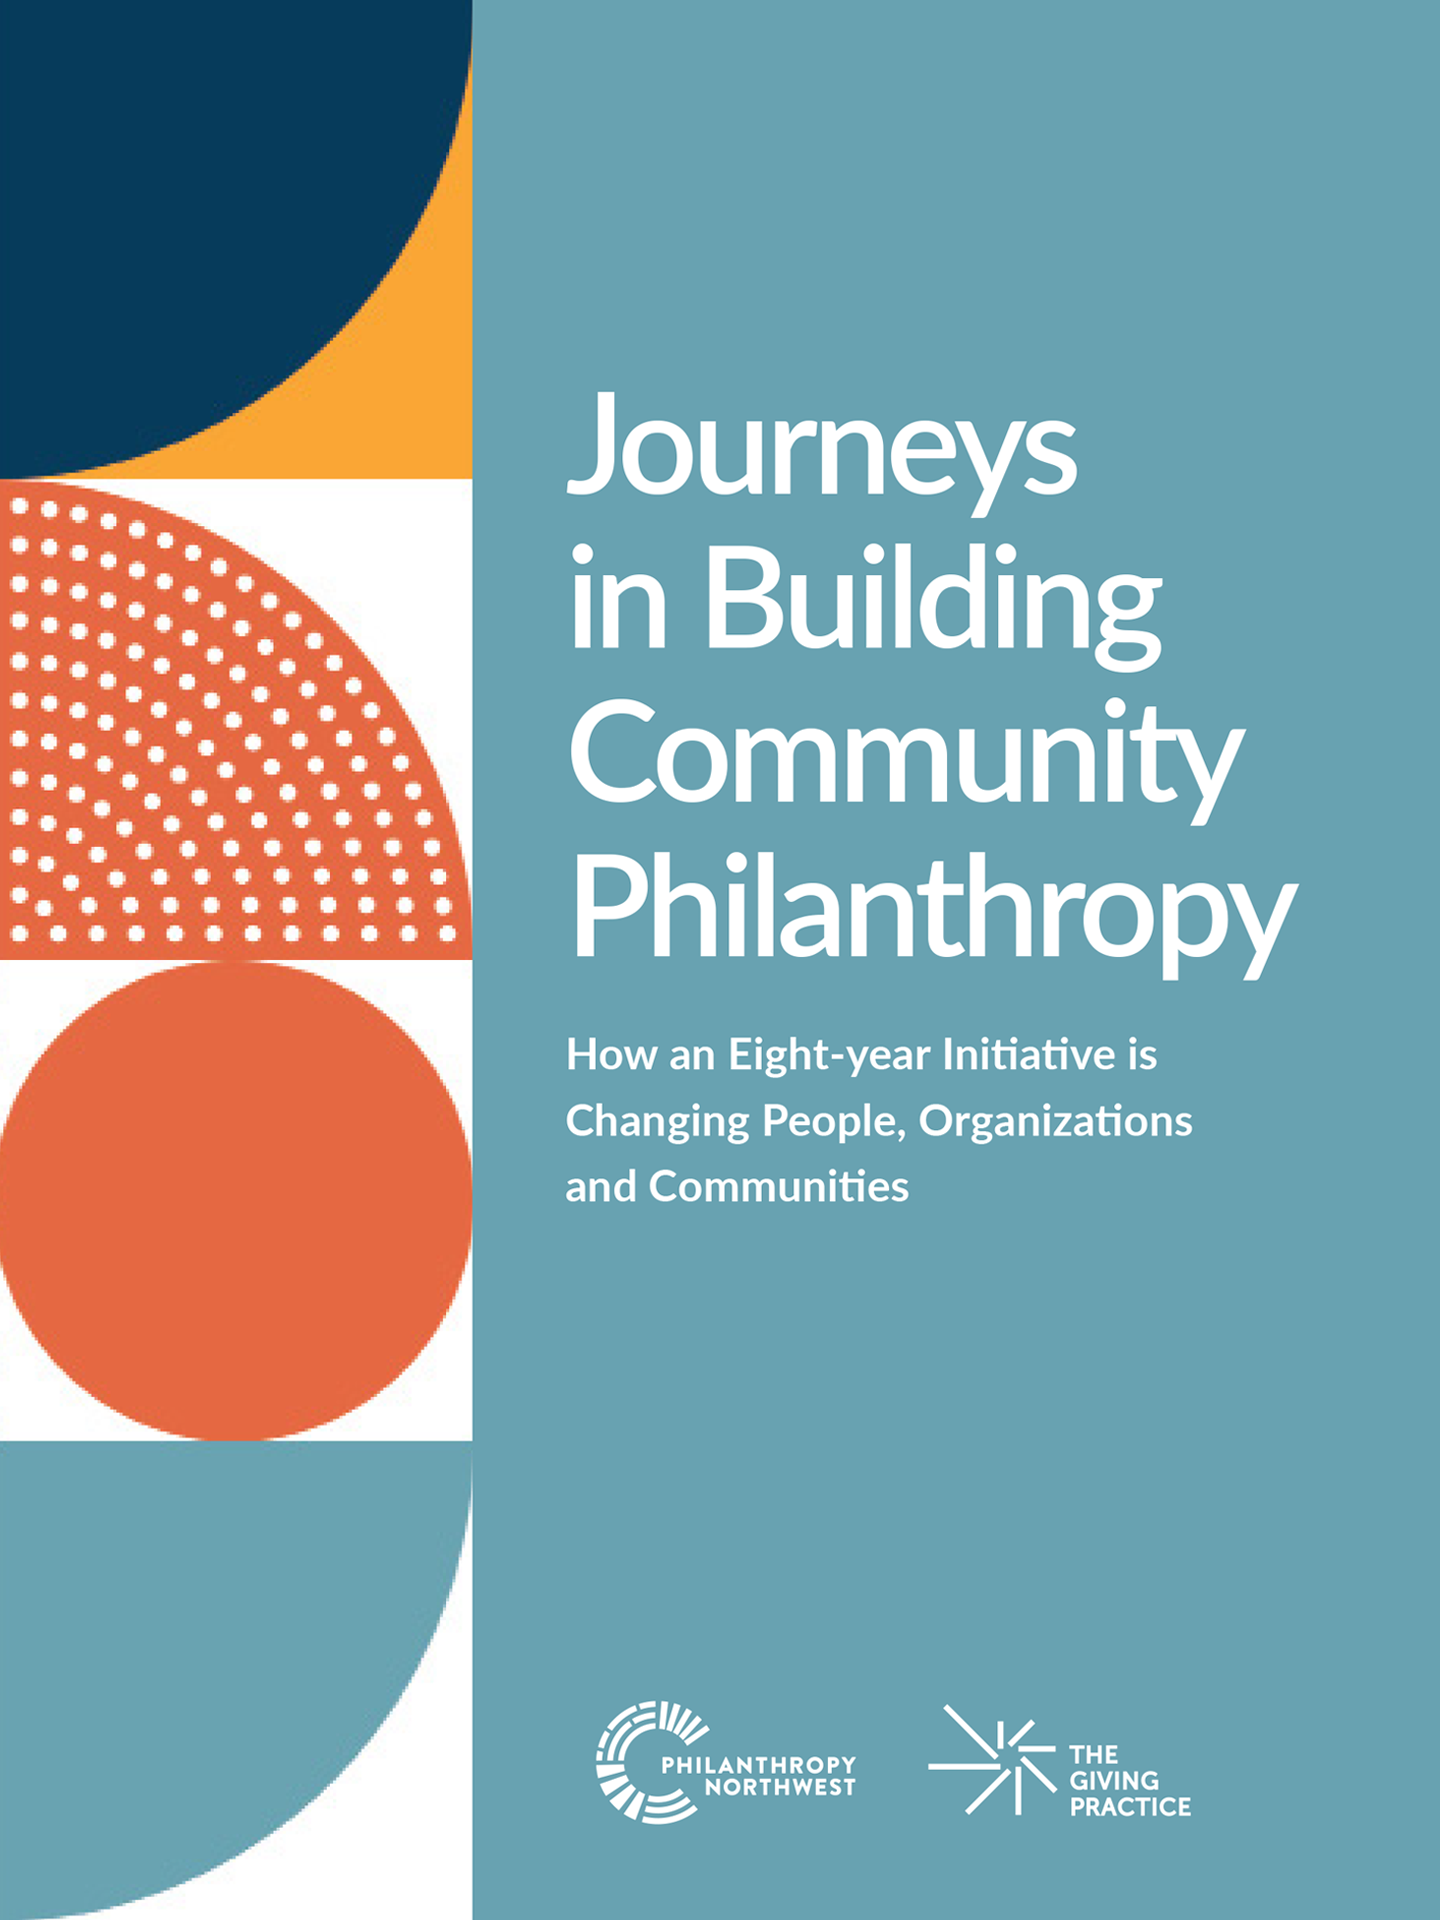 Cover image for report titled, Journeys in Building Community Philanthropy. Cover design has a blue-green background with multi-colored shapes in a vertical block pattern on the left side.